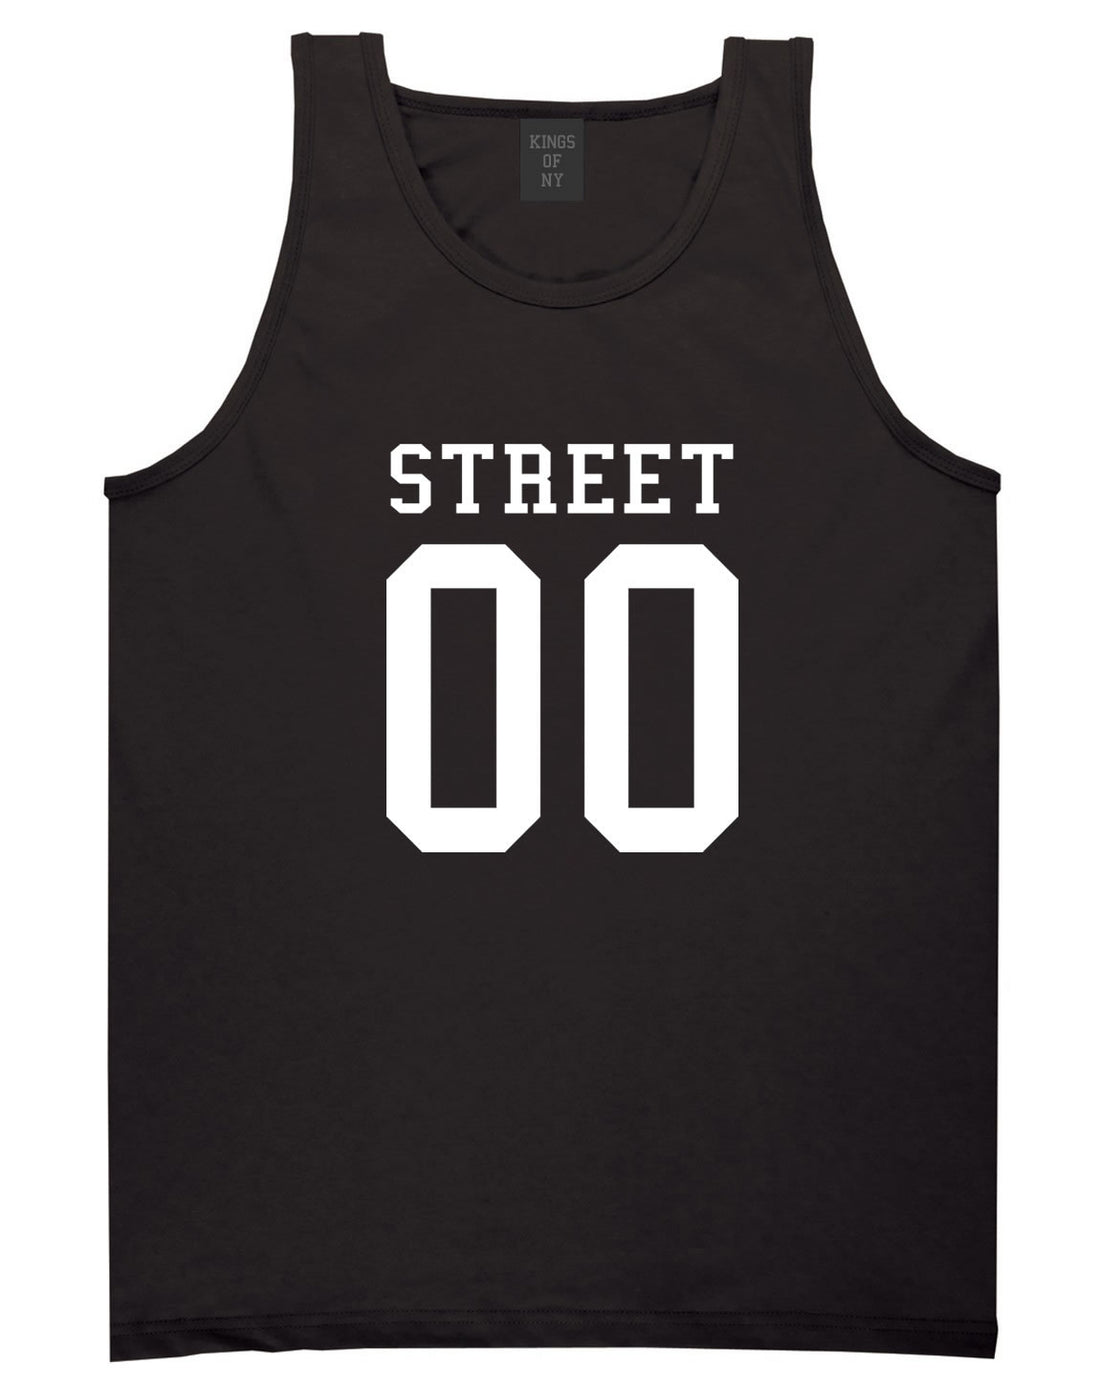 Street Team 00 Jersey Tank Top in Black By Kings Of NY